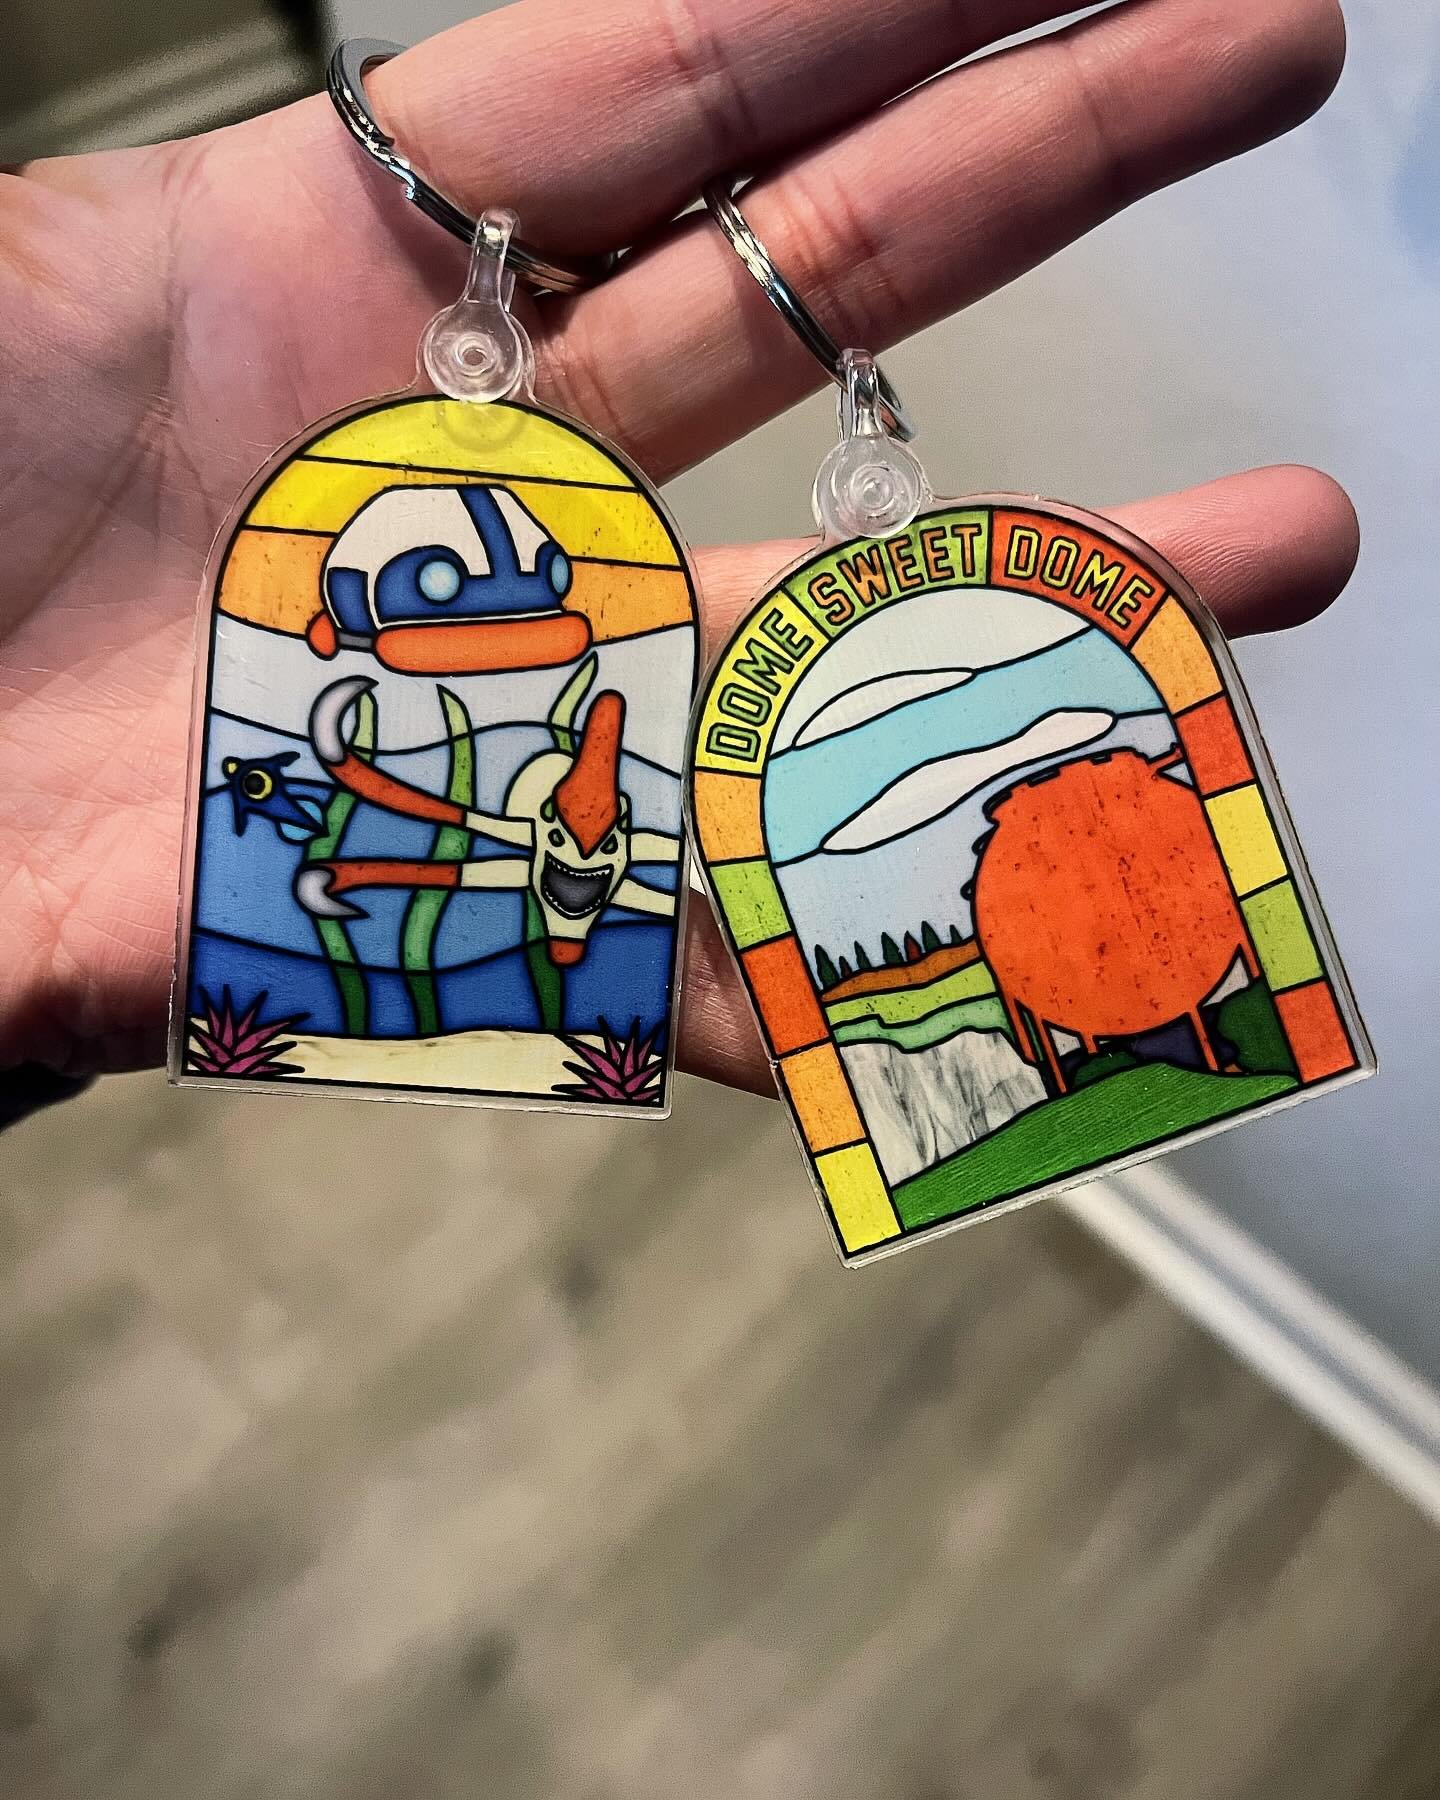 Just arrived! Decided to give @stickermule keychains a try for the stained glass designs and I love them! Will have them up for sale soon!
.
.
.
#survivalgames #subnautica #rustgame #rustgamers #subnauticafanart #subnauticaart #subnauticagame #rustga